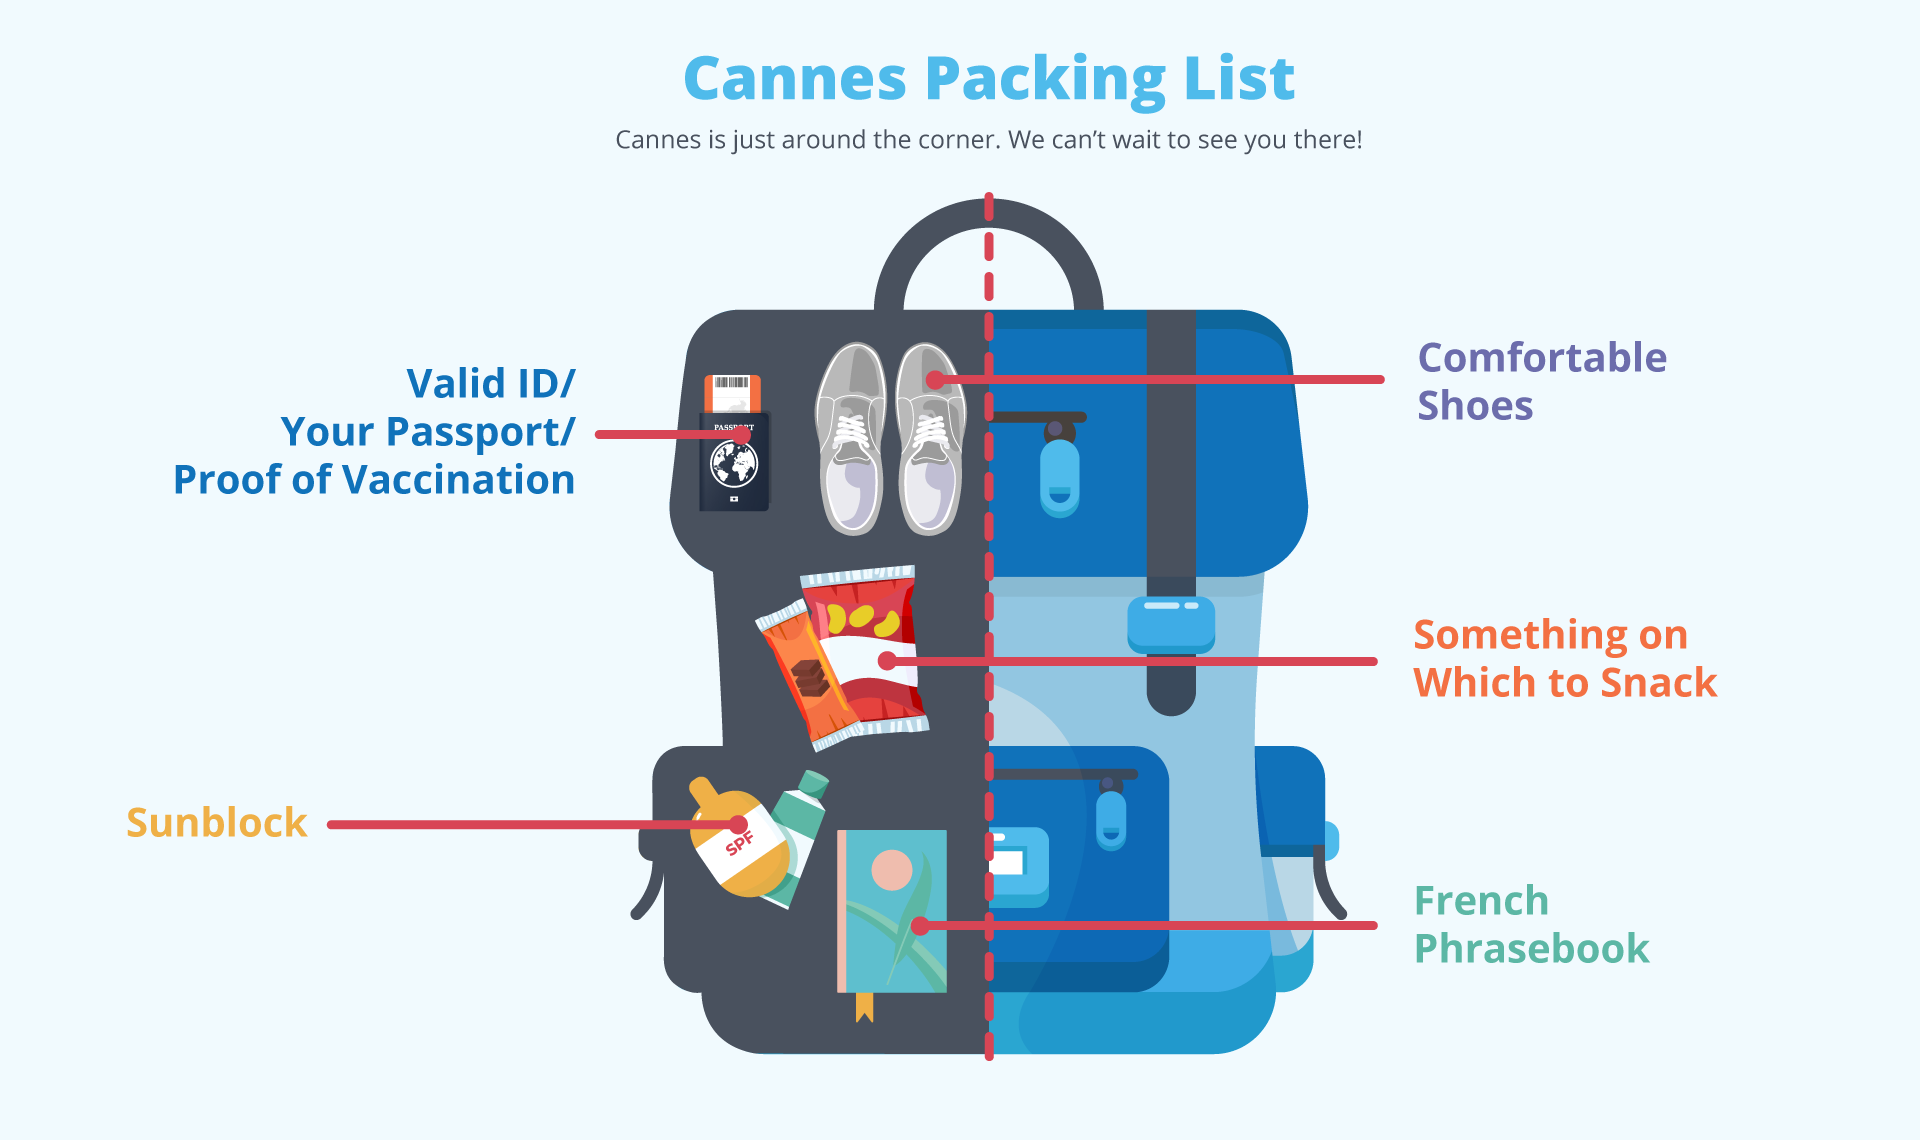 Cannes Packing List